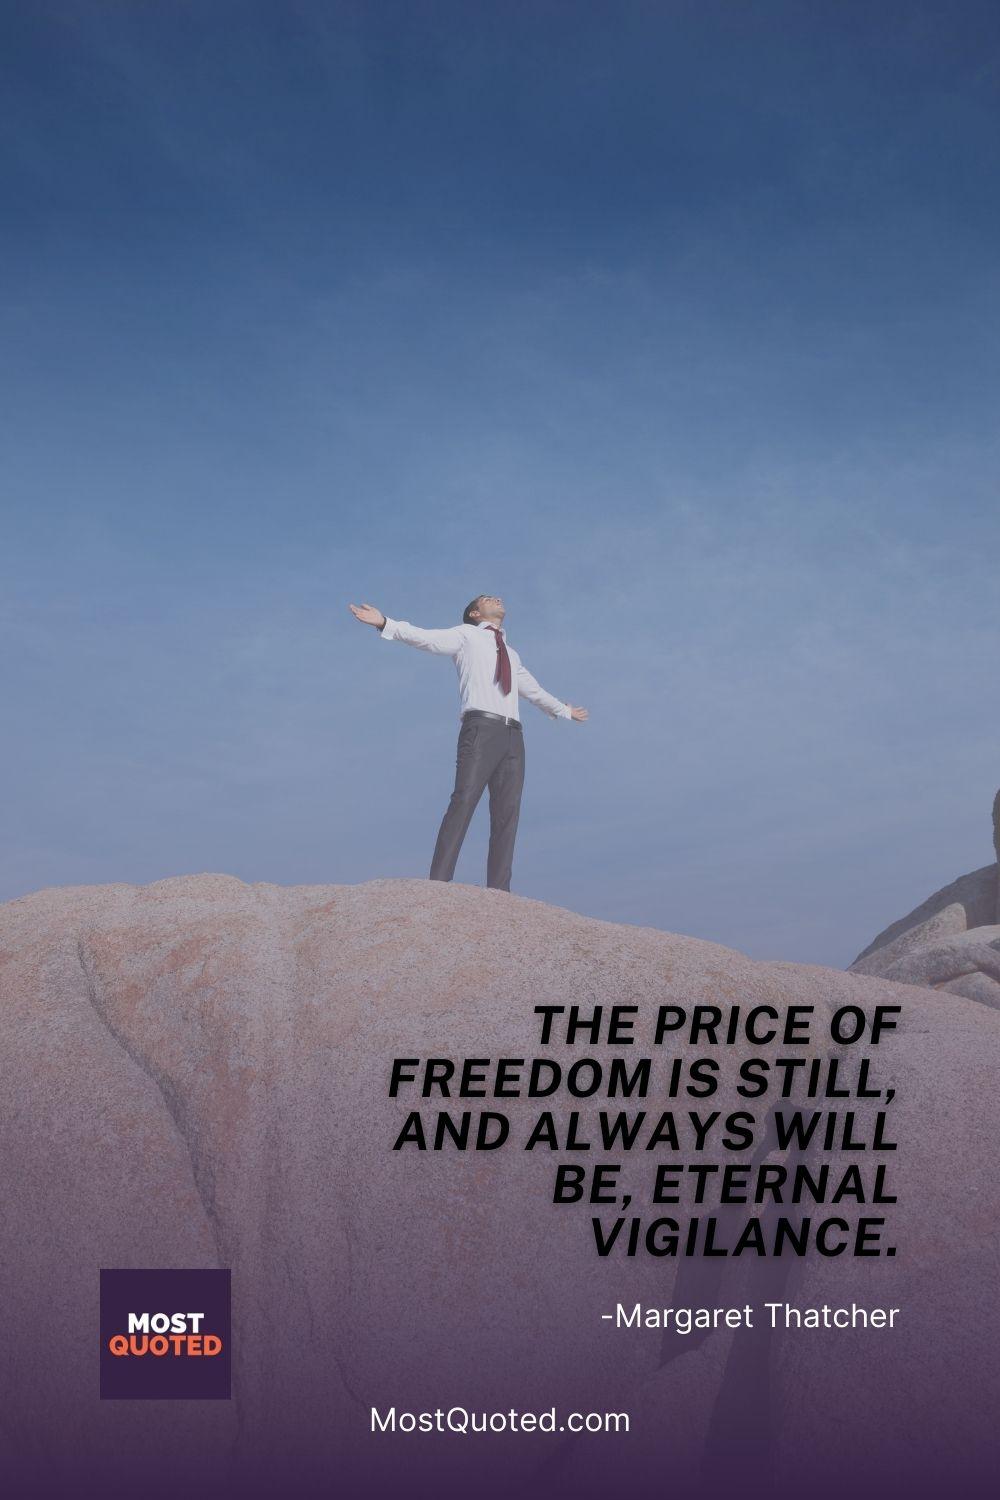 The price of freedom is still, and always will be, eternal vigilance. - Margaret Thatcher